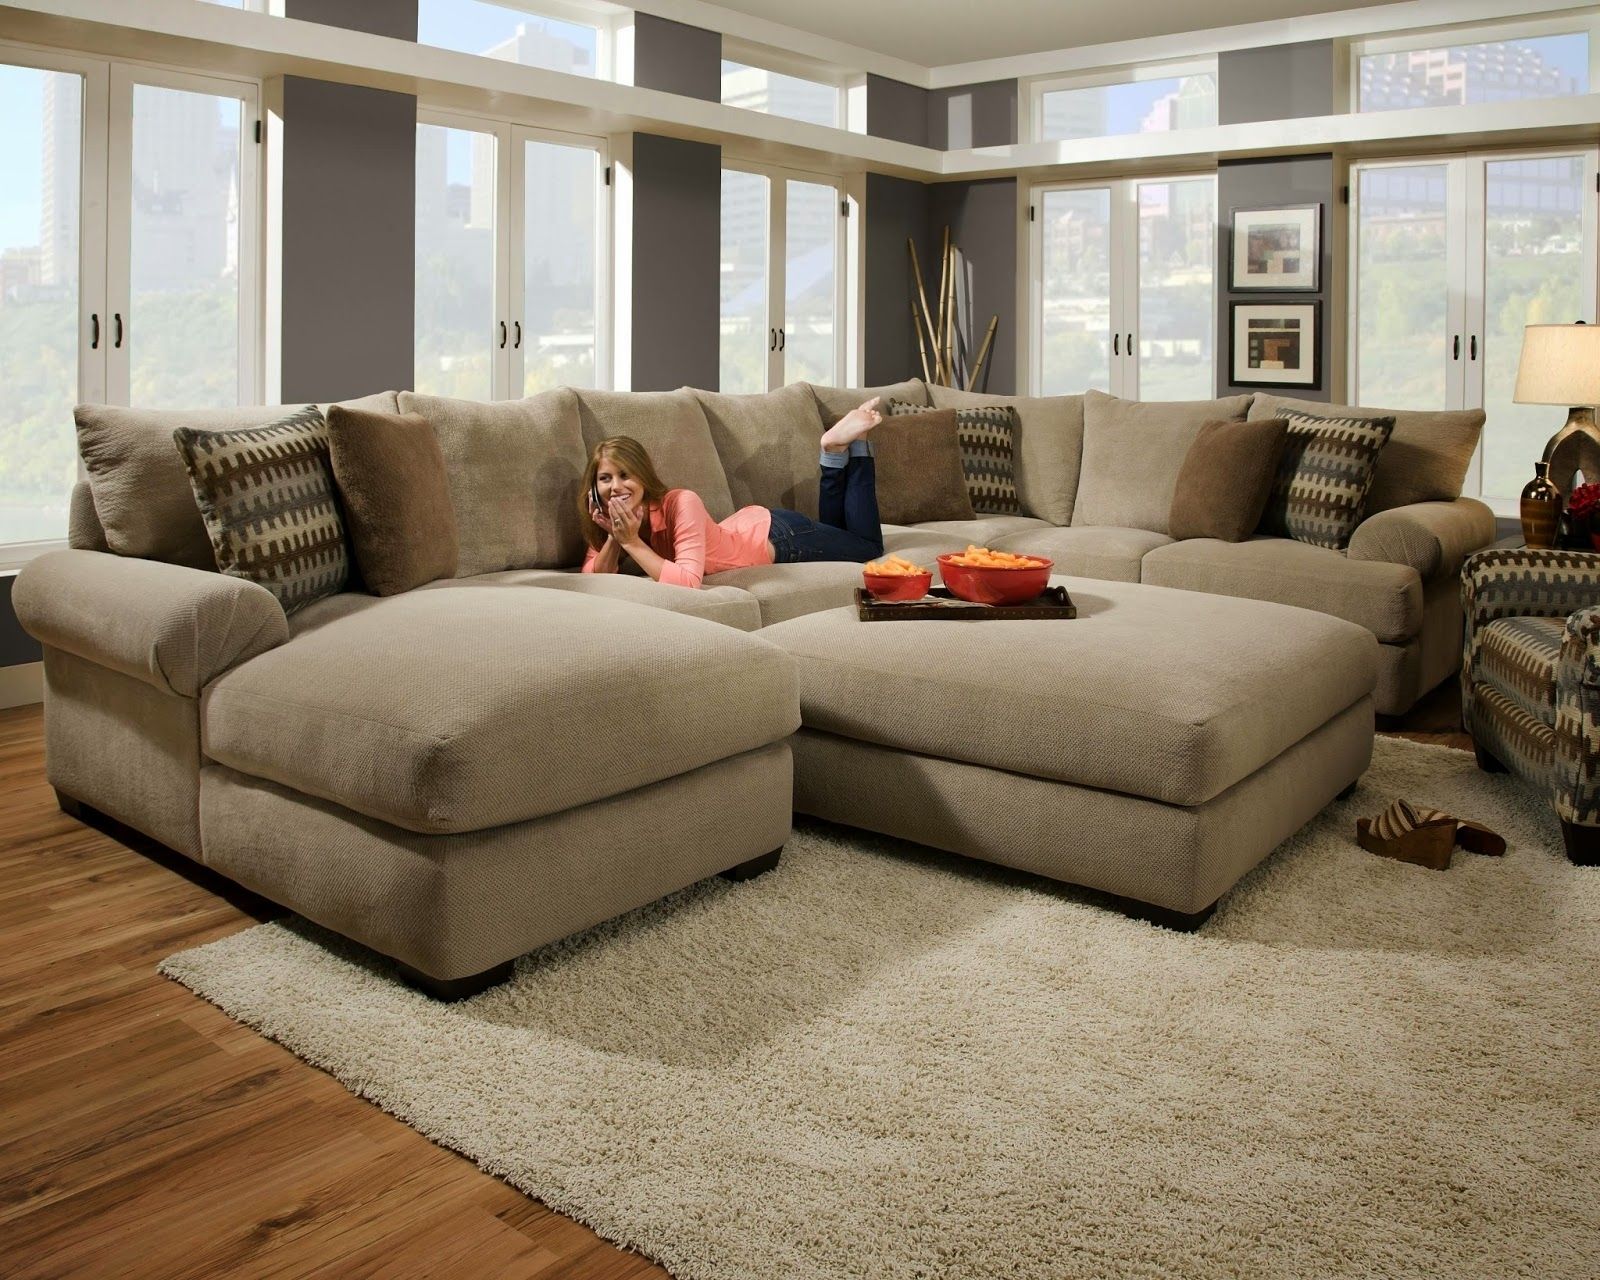 Sectional Sofa With Ottoman – Foter With Sofas With Ottomans (View 3 of 15)